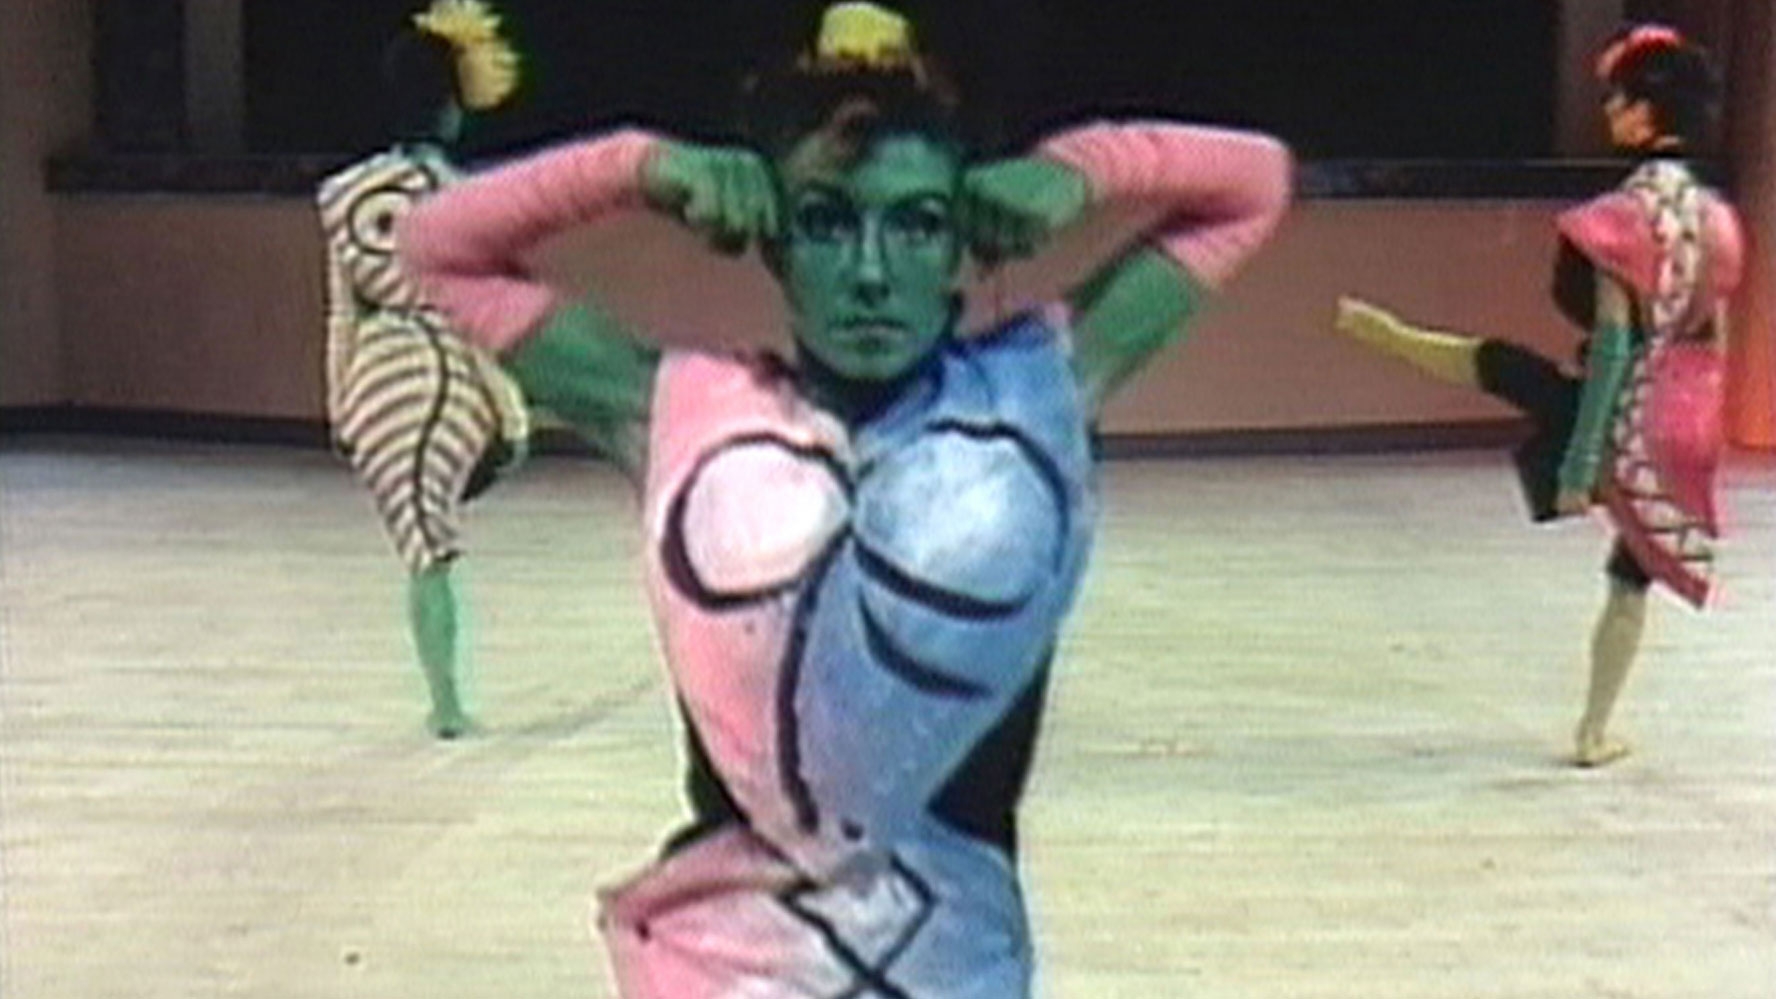 A woman painted green wearing a half pink, half blue costume with a Picasso inspired nude female form painted on her outfit. Two other female performers are in the background similarity dressed.  